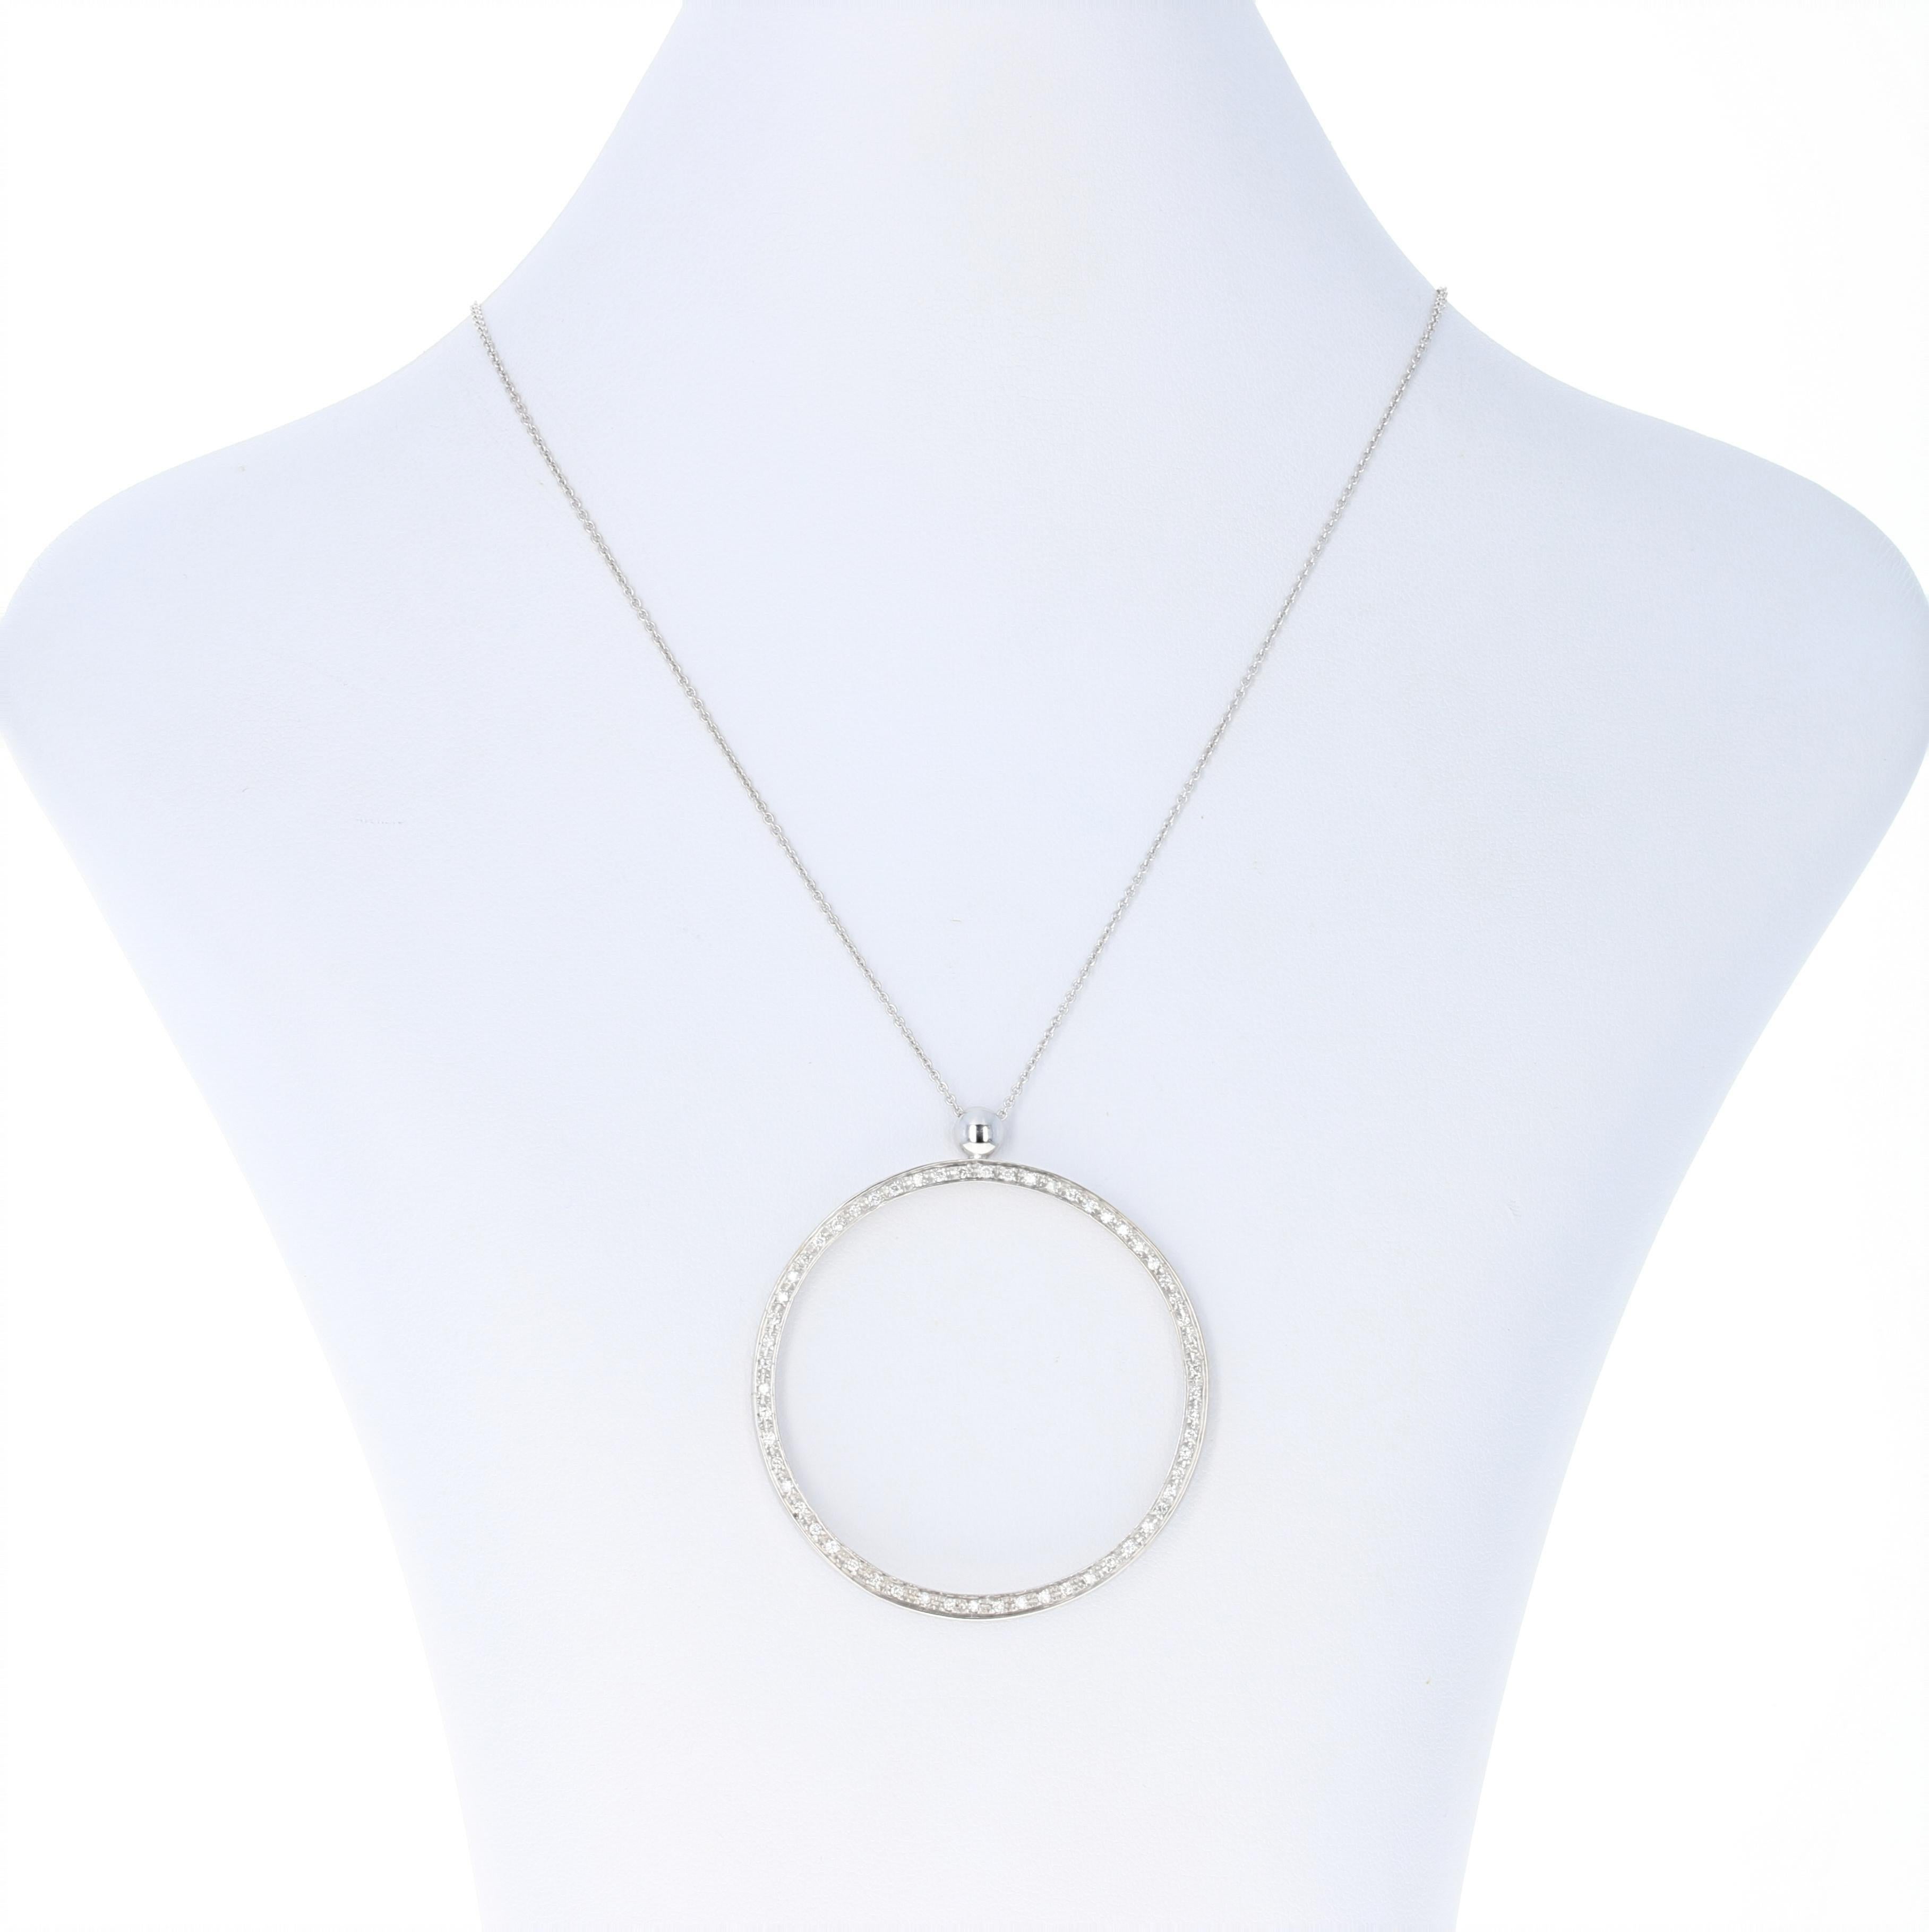 Get glamorous in gold! Beautifully crafted in 18k white gold and glittering with a brilliant array of white diamonds, this piece showcases a meaningful eternity-style pendant suspended on a classic cable chain necklace.  

Metal Content: Guaranteed